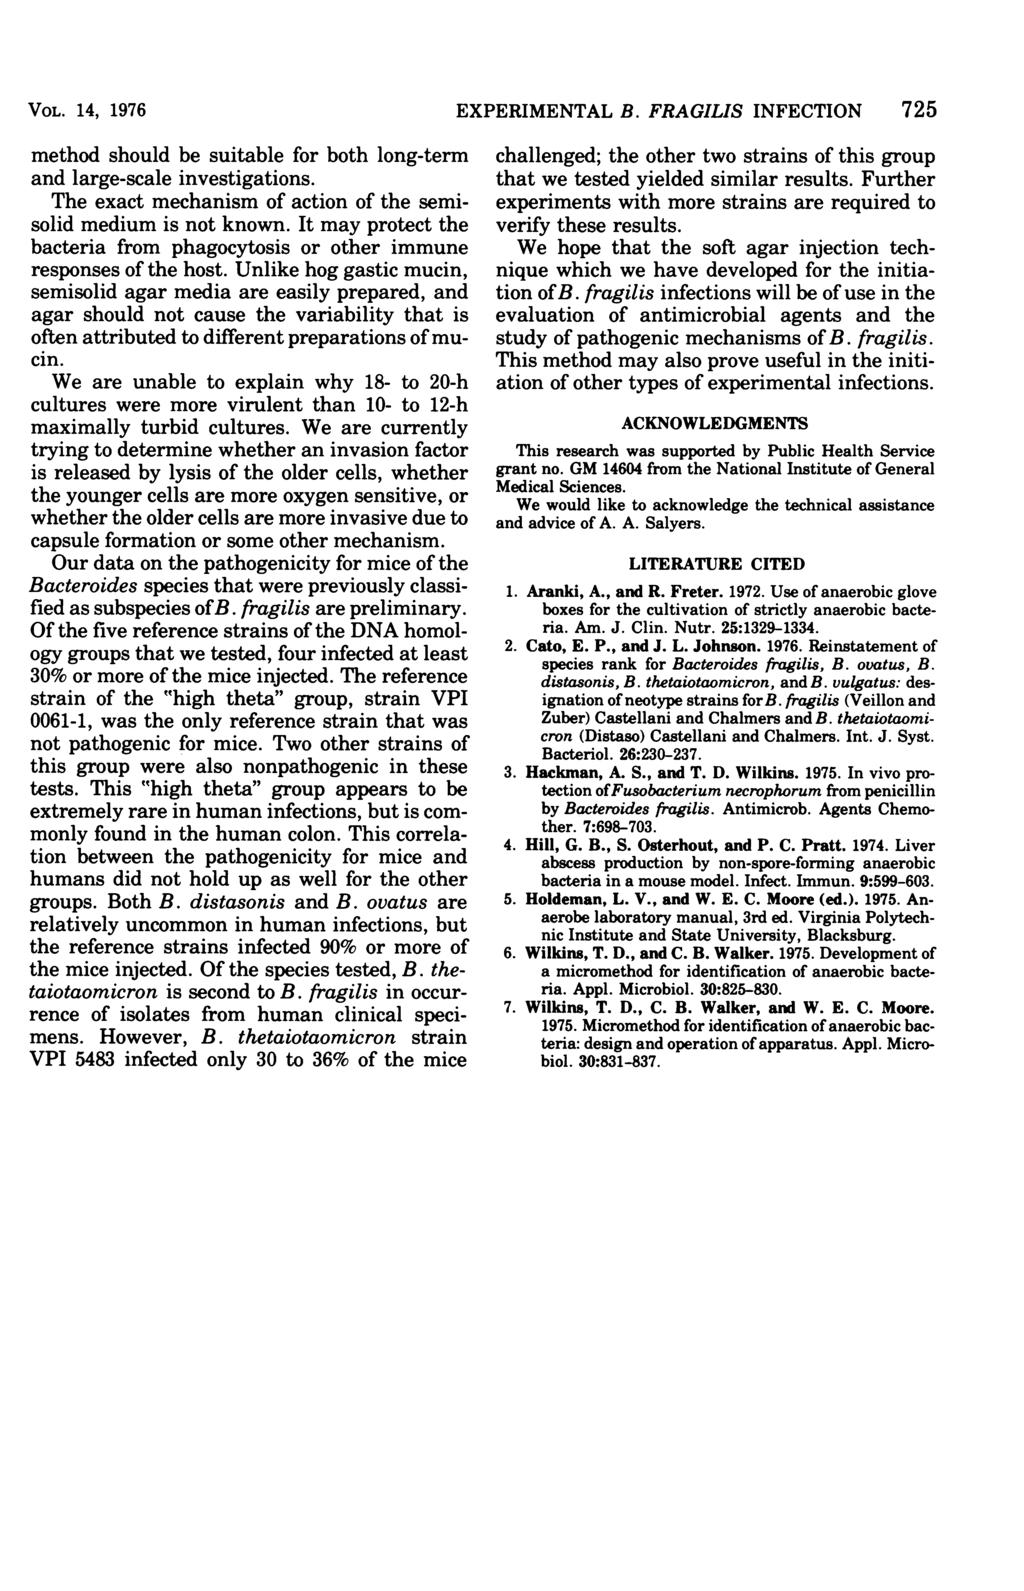 VOL. 14, 1976 method should be suitable for both long-term and large-scale investigations. The exact mechanism of action of the semisolid medium is not known.